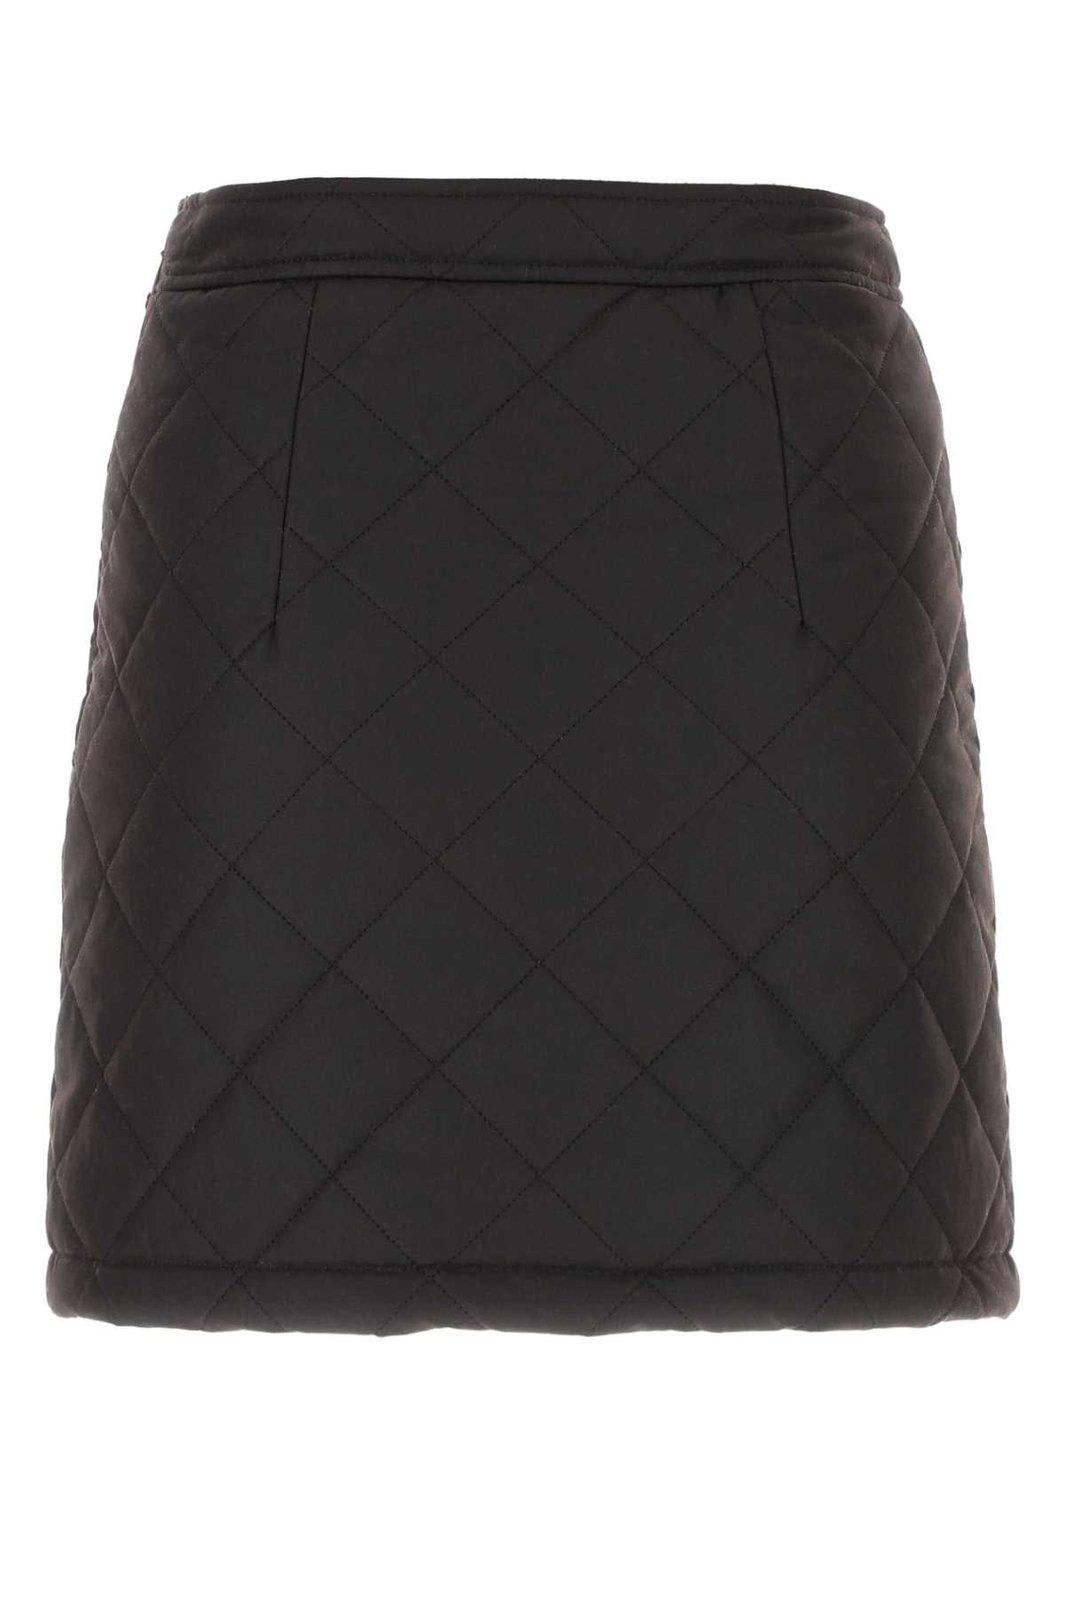 Shop Burberry Diamond Quilted Mini Skirt